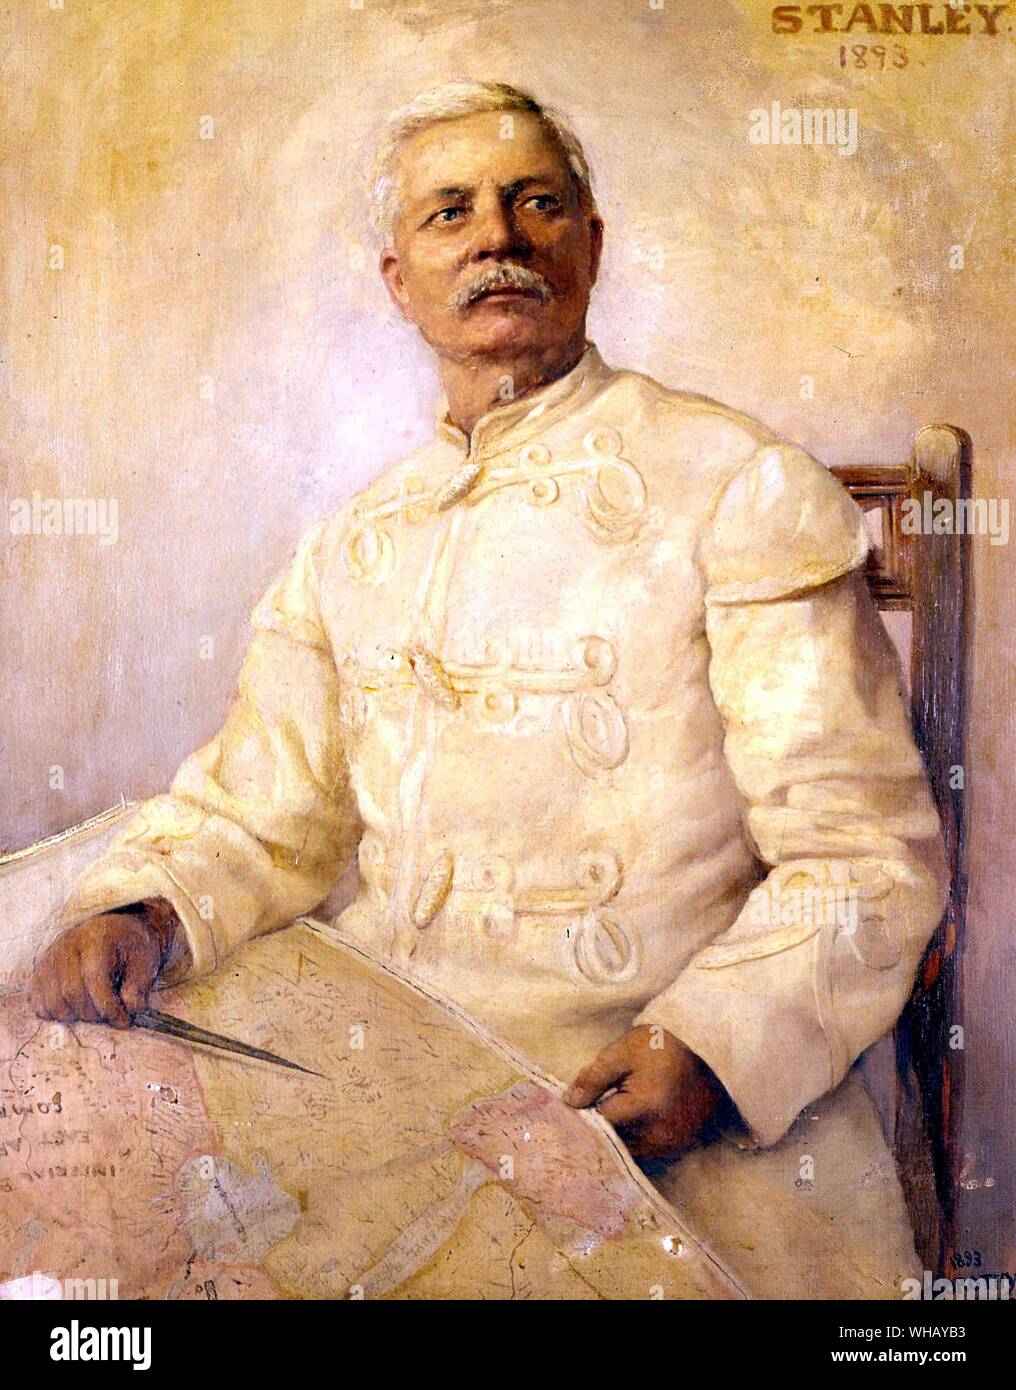 Sir Henry Morton Stanley in the uniform of the Belgian Free State. Painting by Lady Dorothy Stanley (1893). Sir Henry Morton Stanley (1841-1904) was a 19th century, Welsh-born, United States journalist and explorer famous for his exploration of Africa and his search for David Livingstone. The African Adventure - A History of Africa's Explorers by Timothy Severin, page 258. Stock Photo